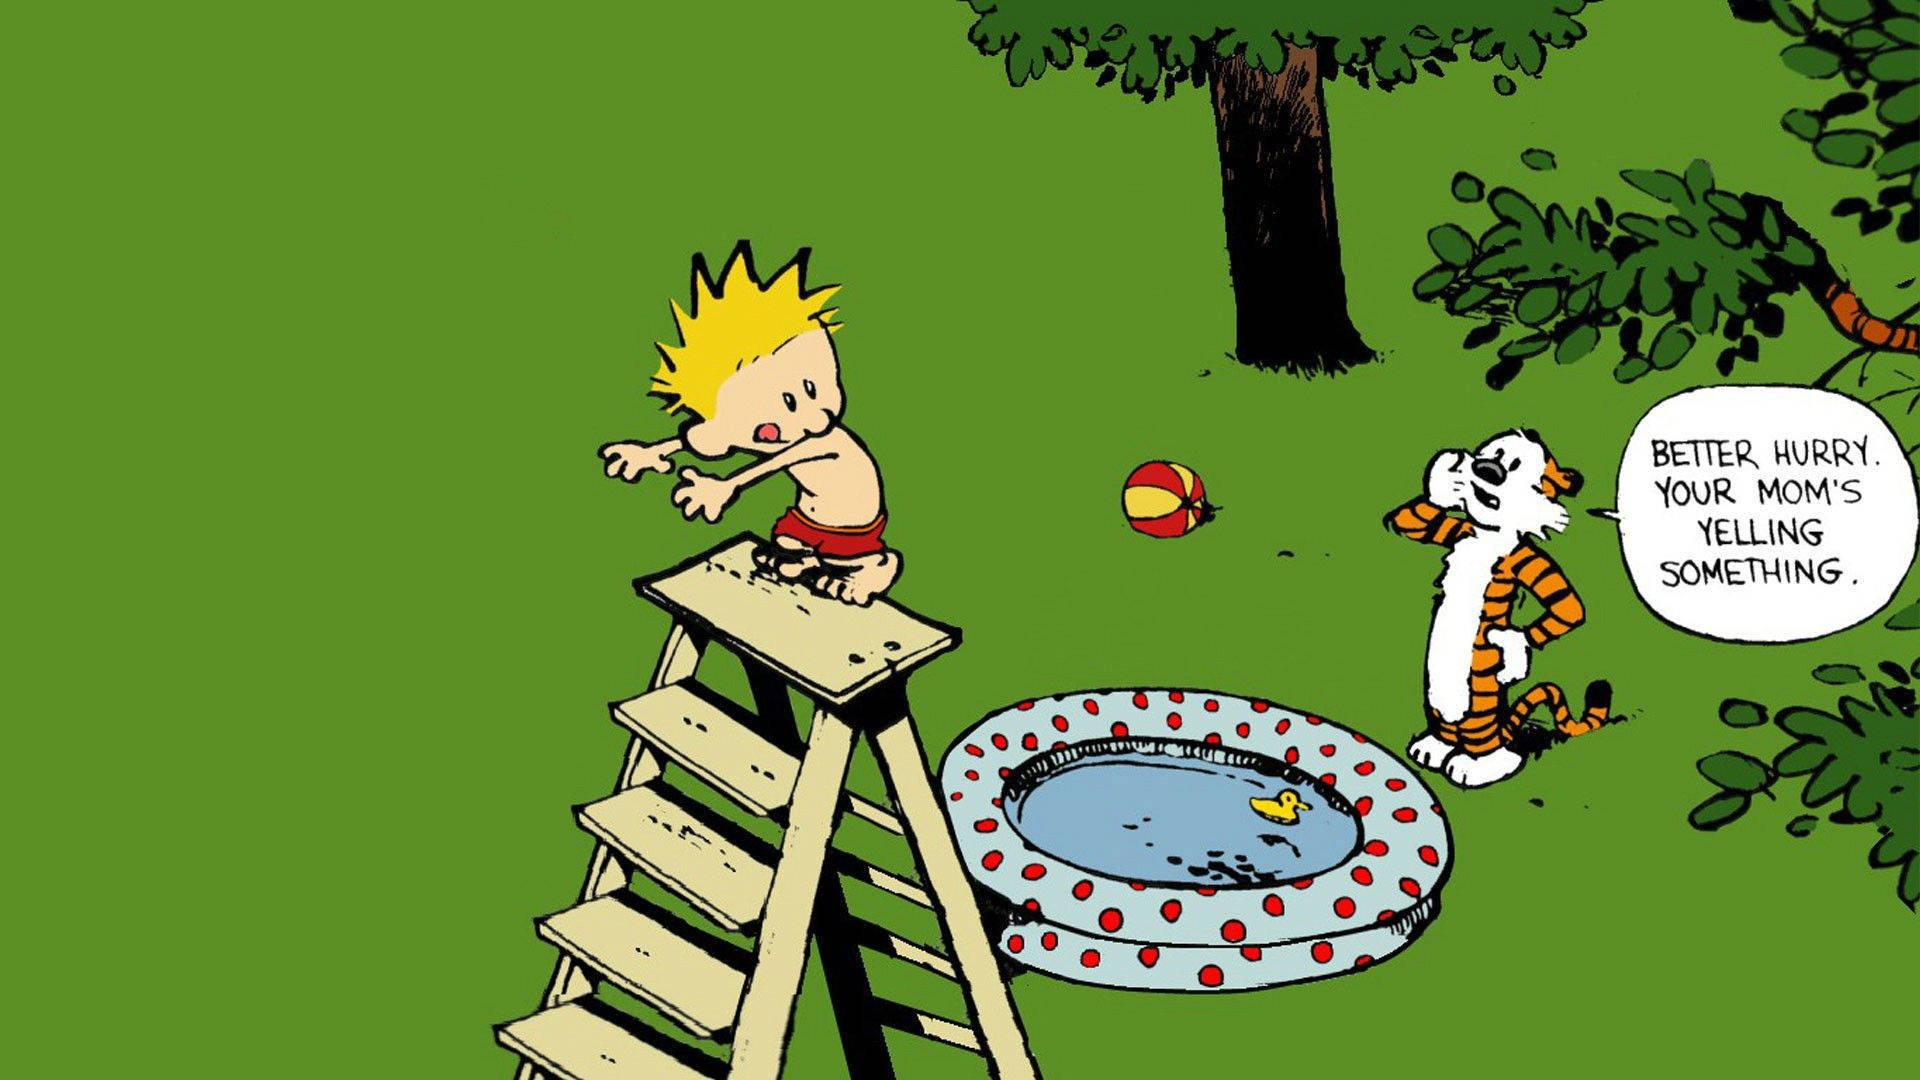 1920X1080 Calvin And Hobbes Wallpaper and Background